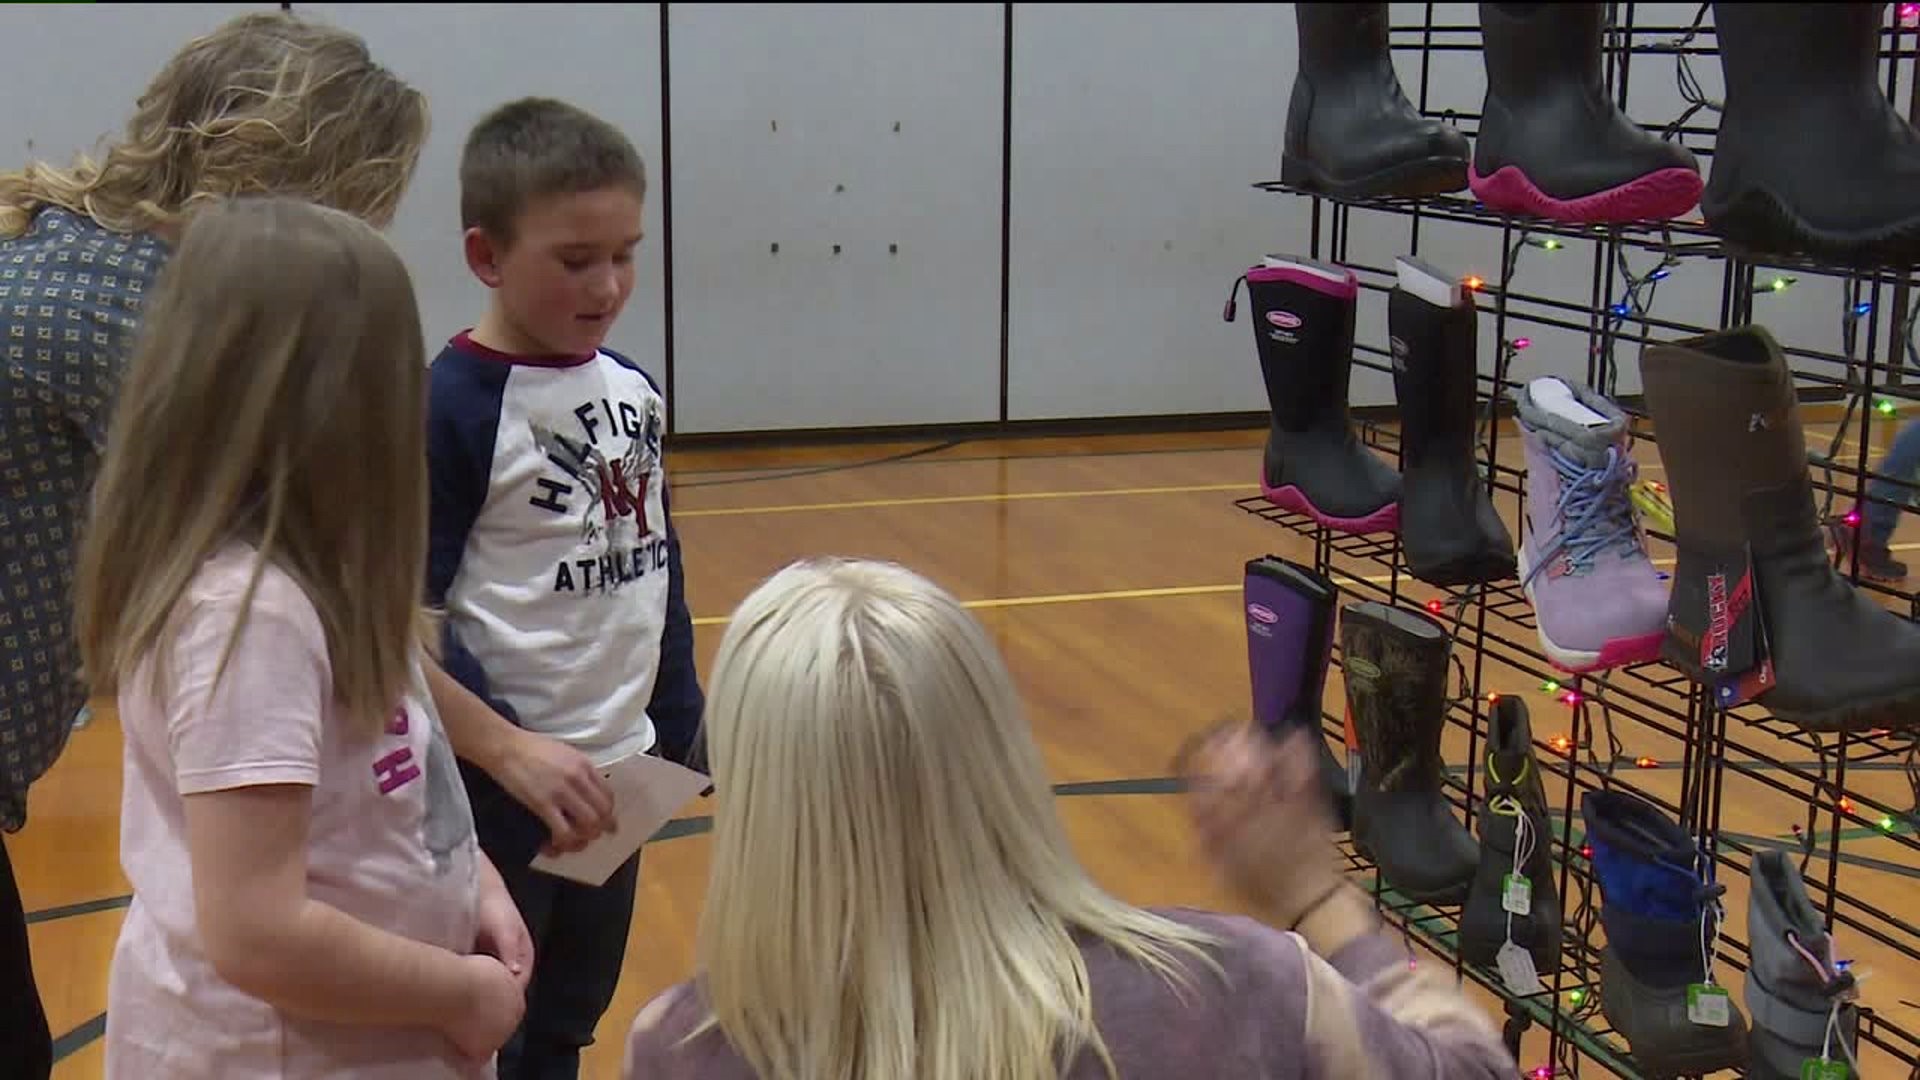 Local Businessman Donates Over 500 Pairs of Shoes to Elementary Students